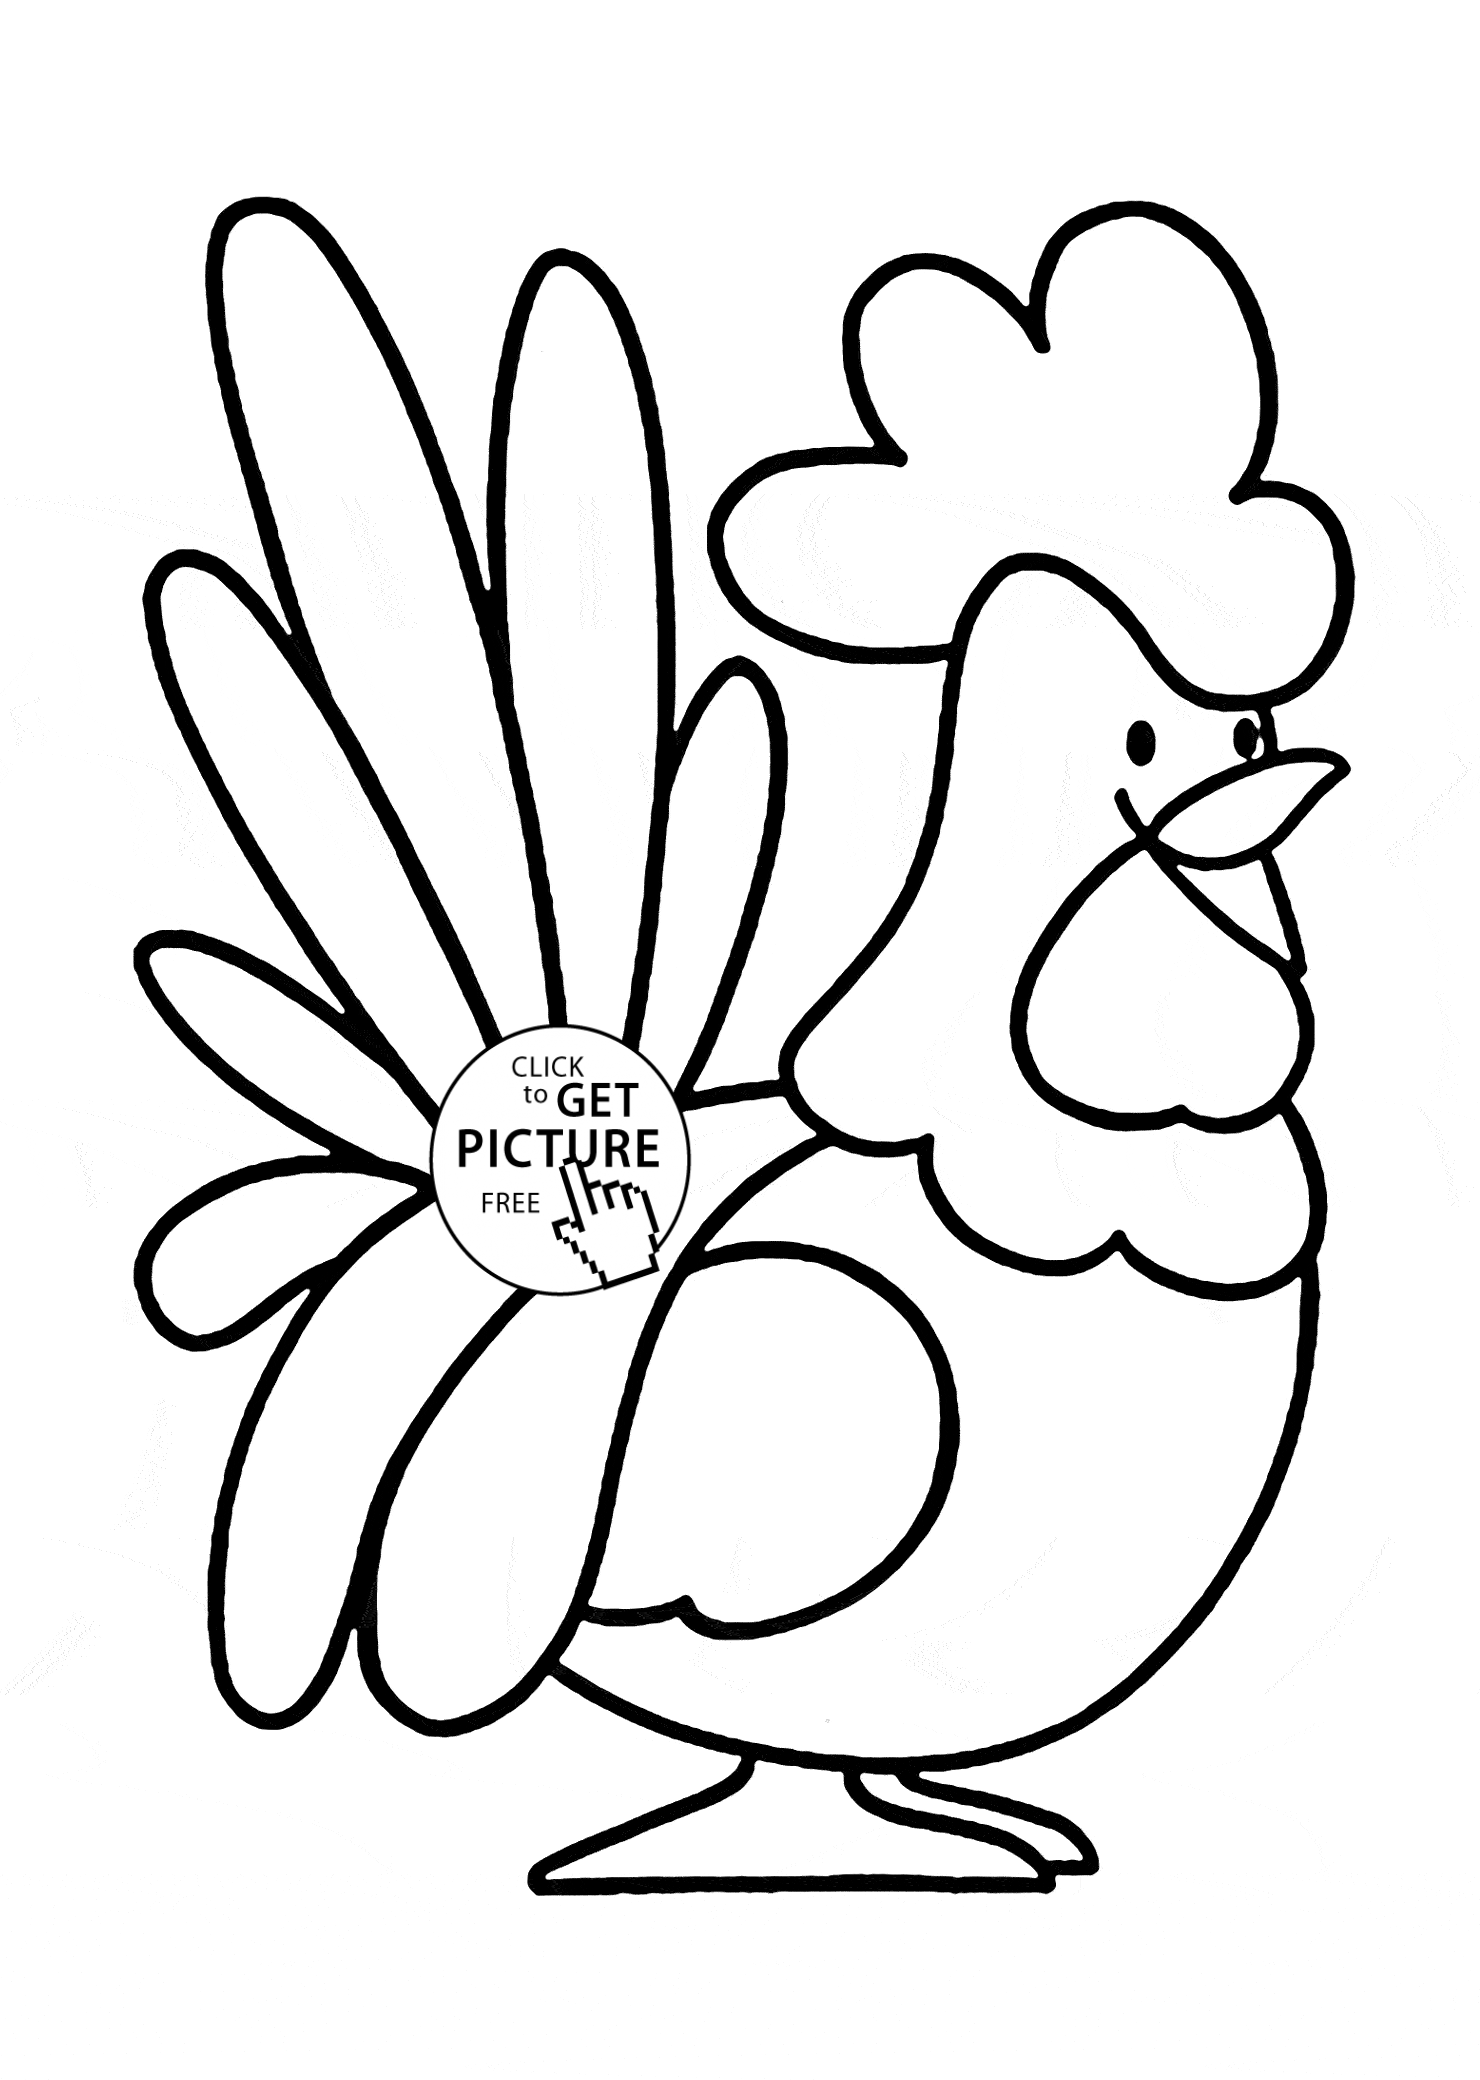 Cute Rooster coloring page for kids, animal coloring pages ...